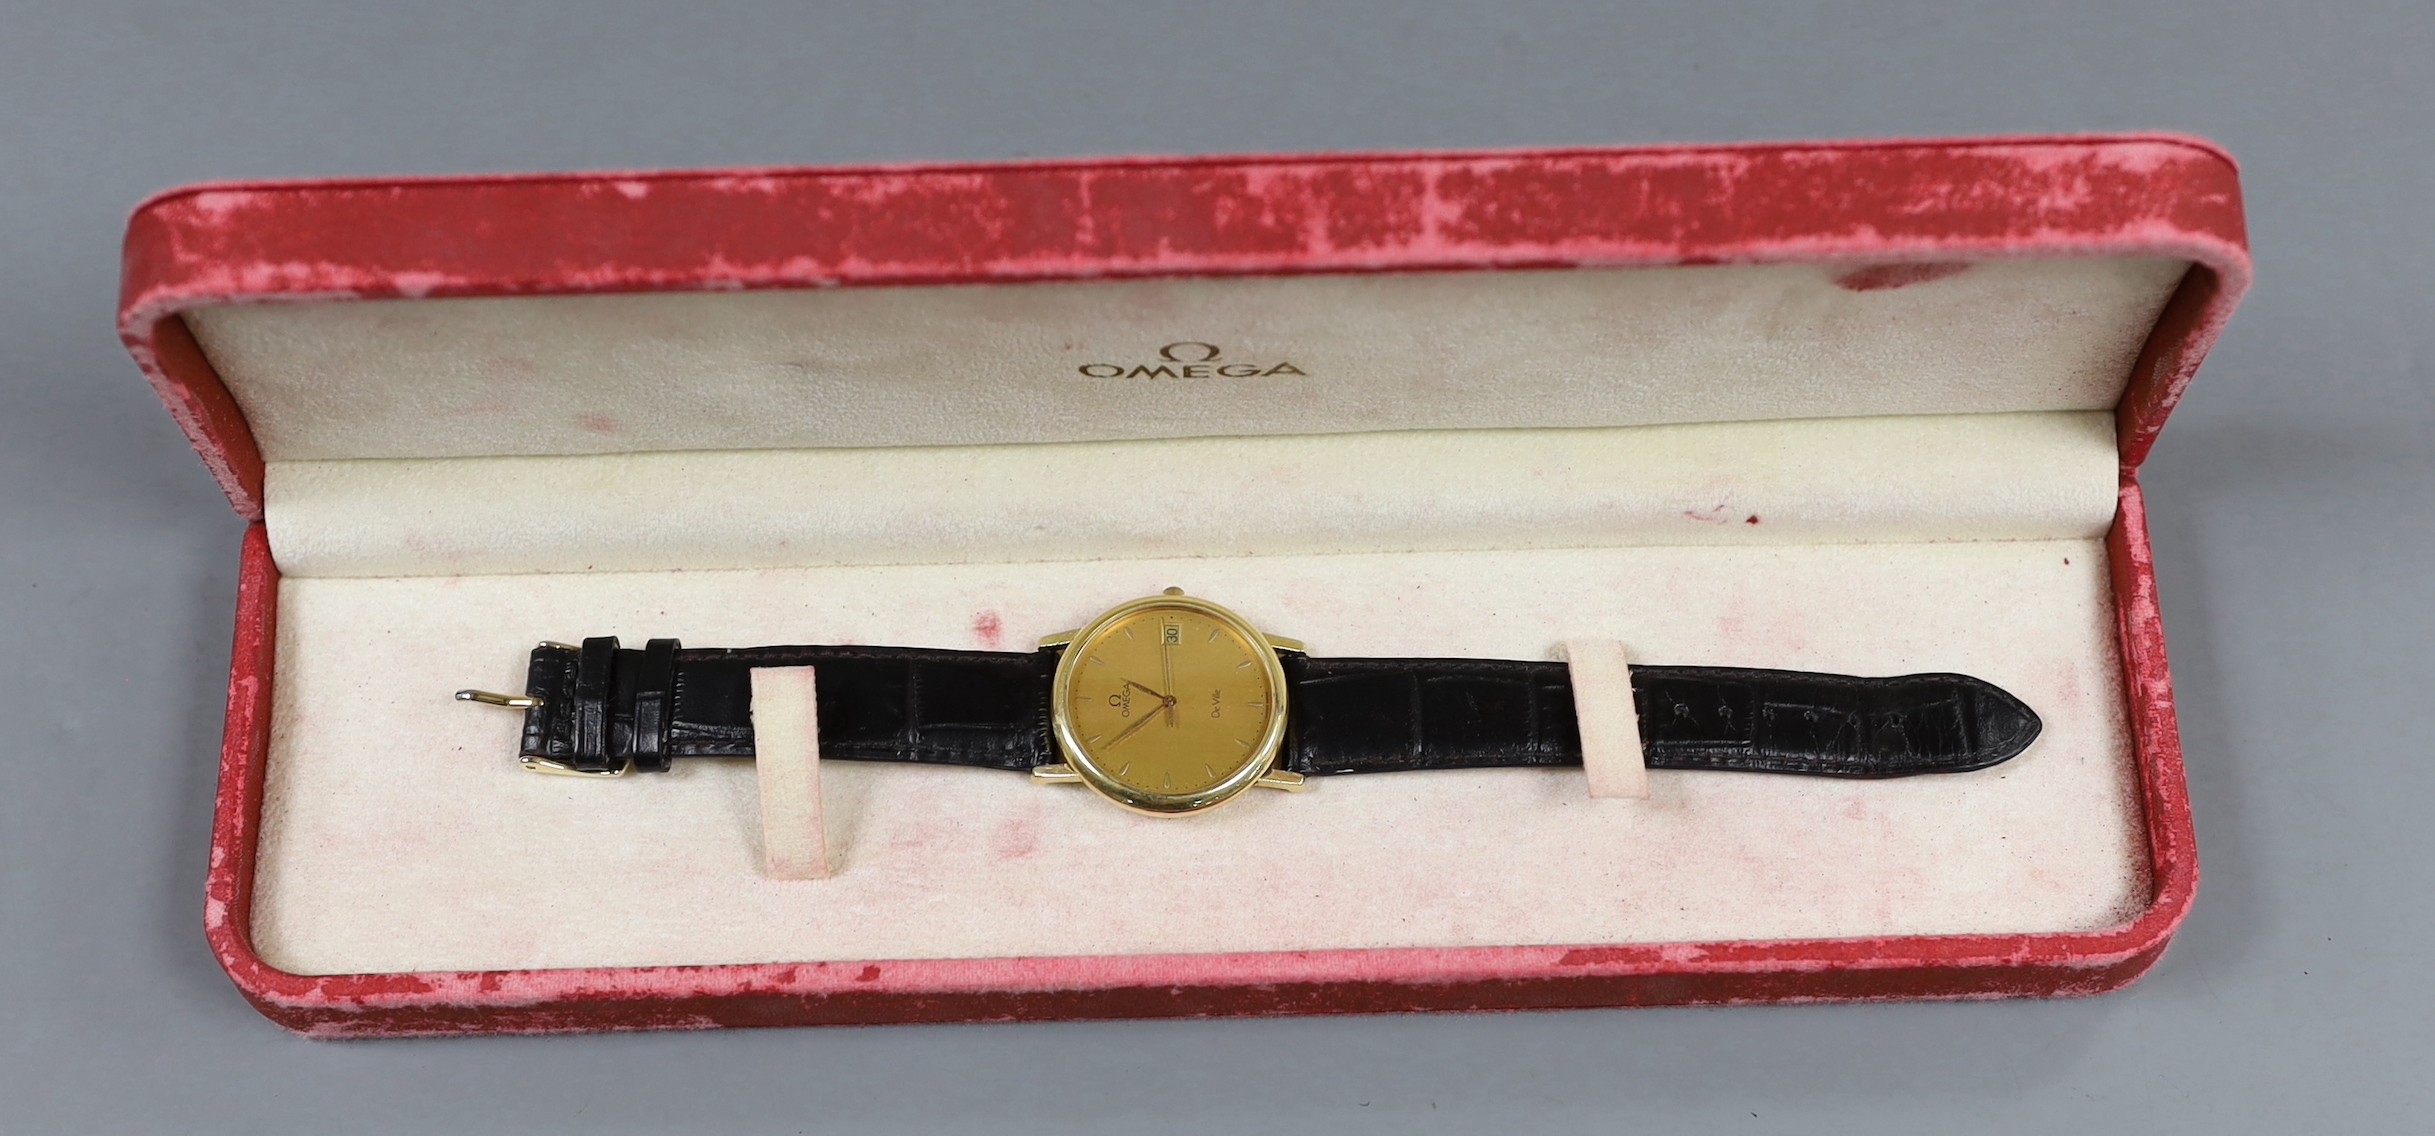 A gentleman's 18ct gold Omega De Ville quartz wrist watch, on associated leather strap, with Omega box.